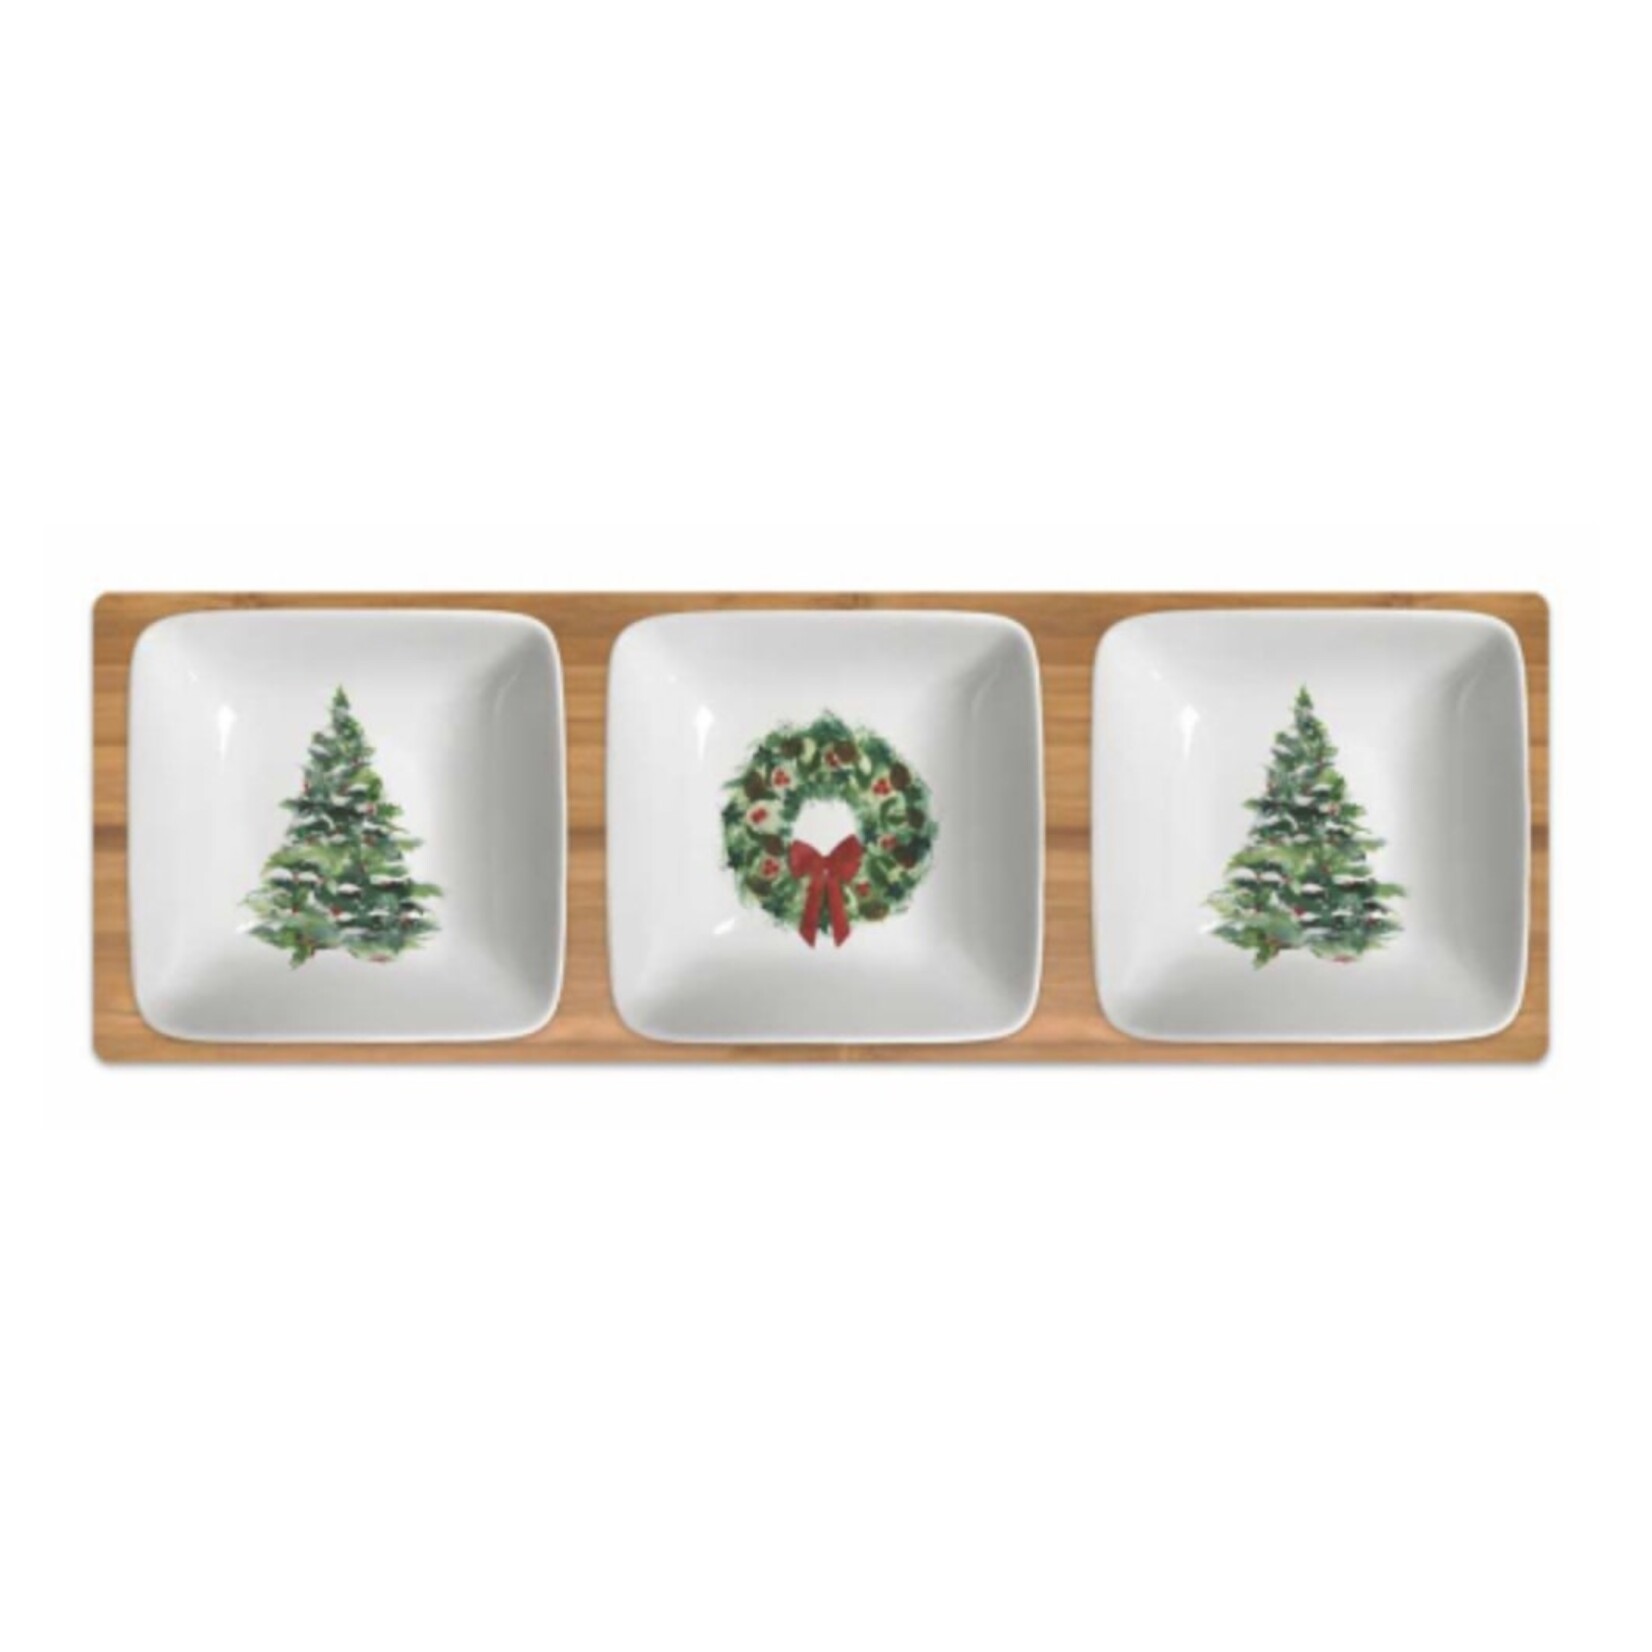 PAPER PRODUCTS DESIGN PPD Dipping Dish Set - Winter Tree & Wreath